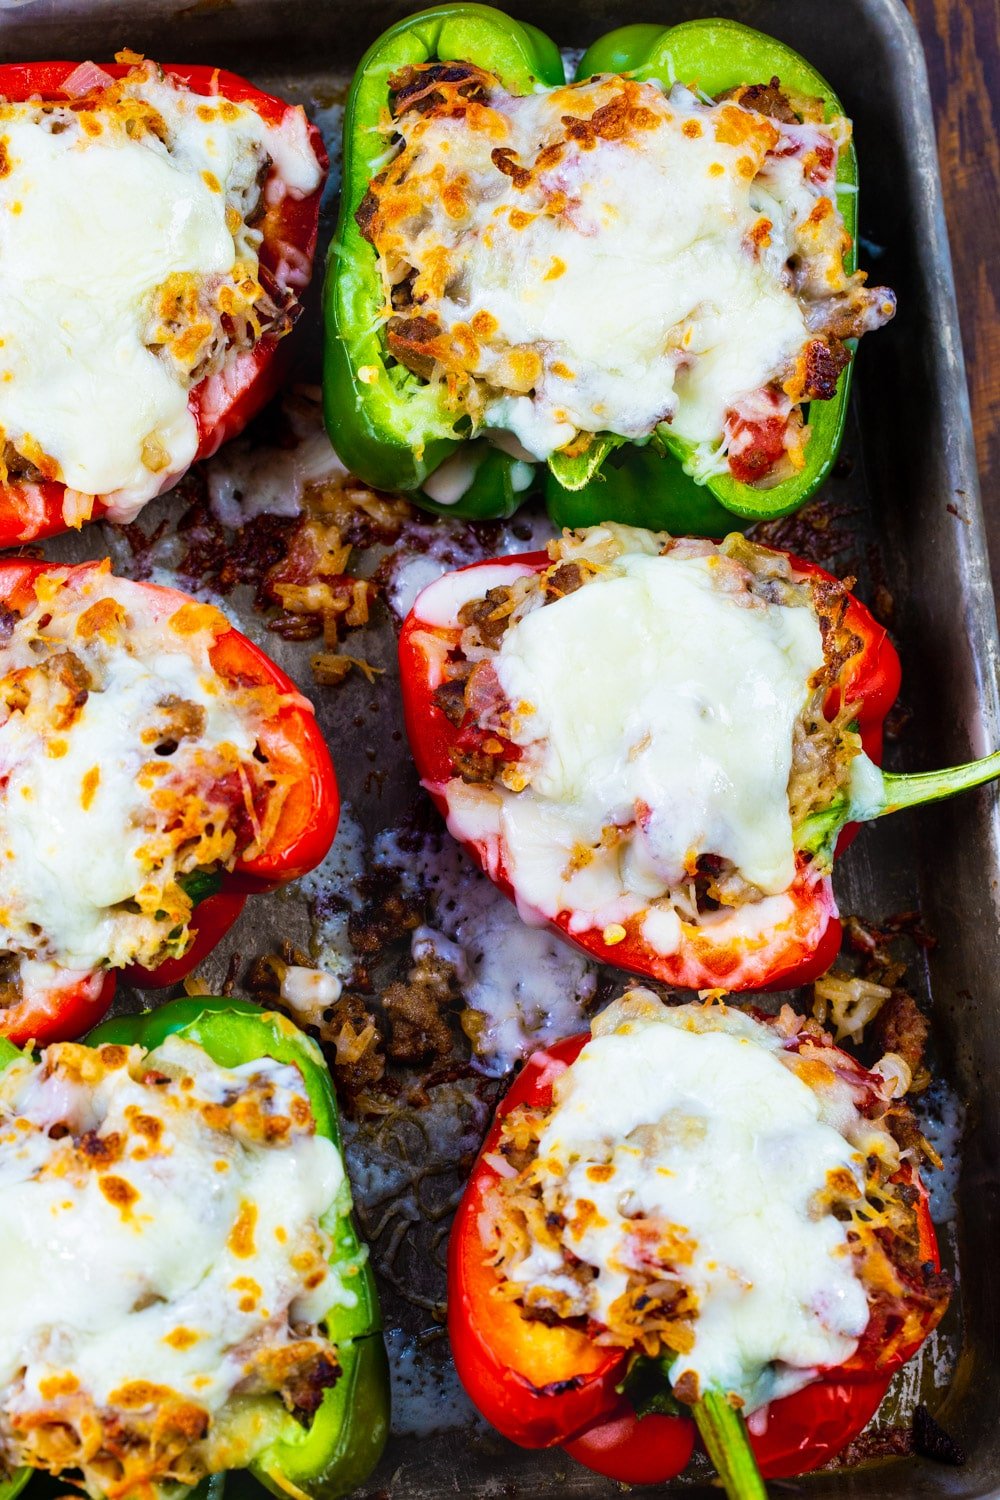 Six cooked stuffed peppers on baking sheet.